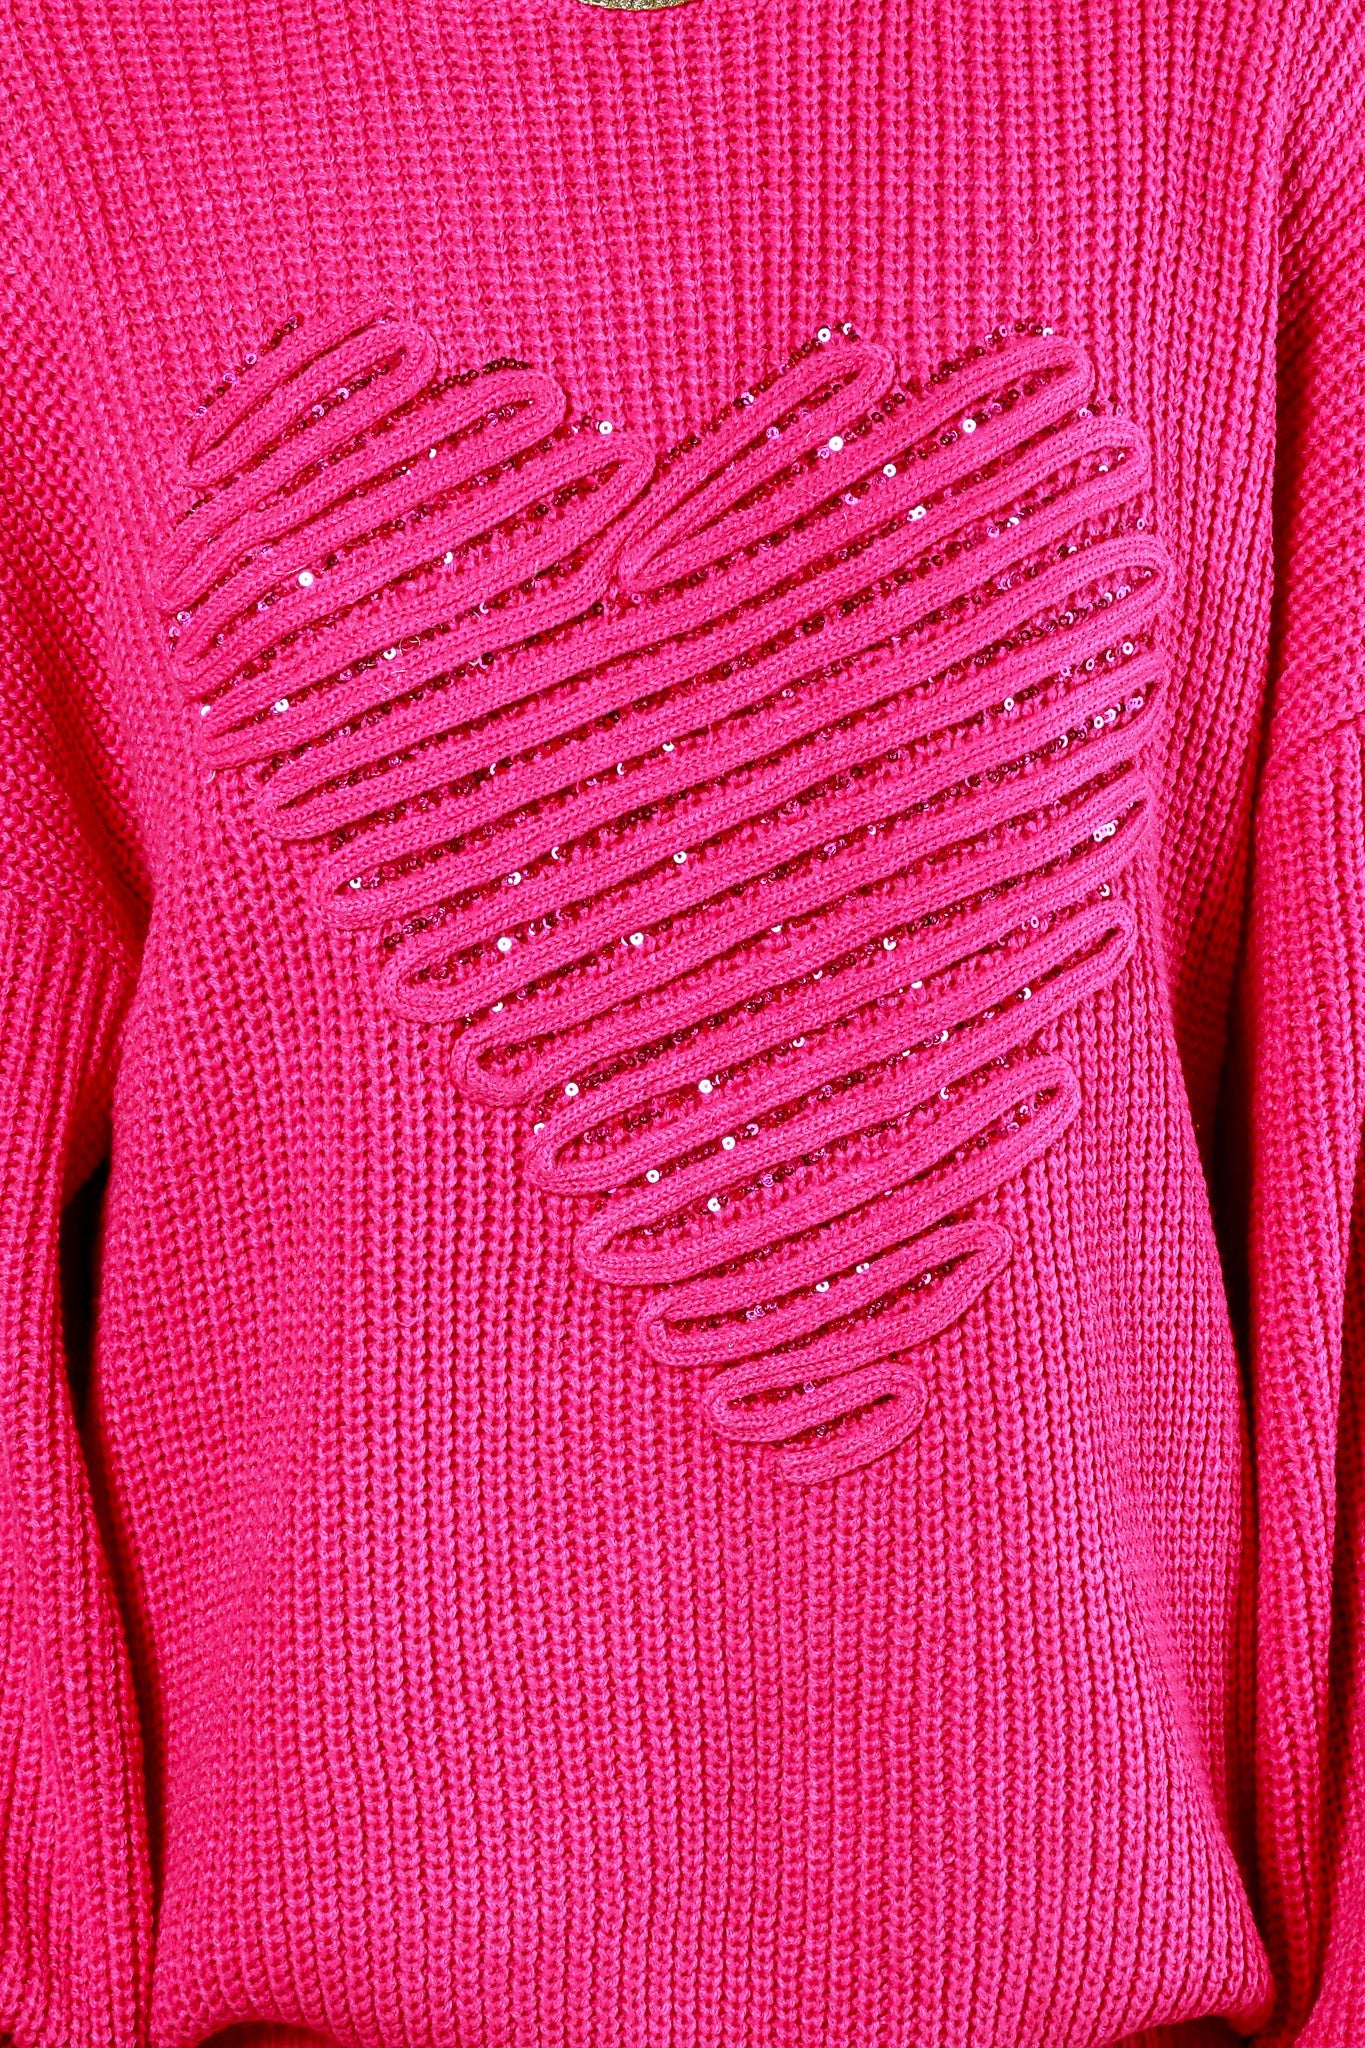 HEART TO HEART PINK SWEATER